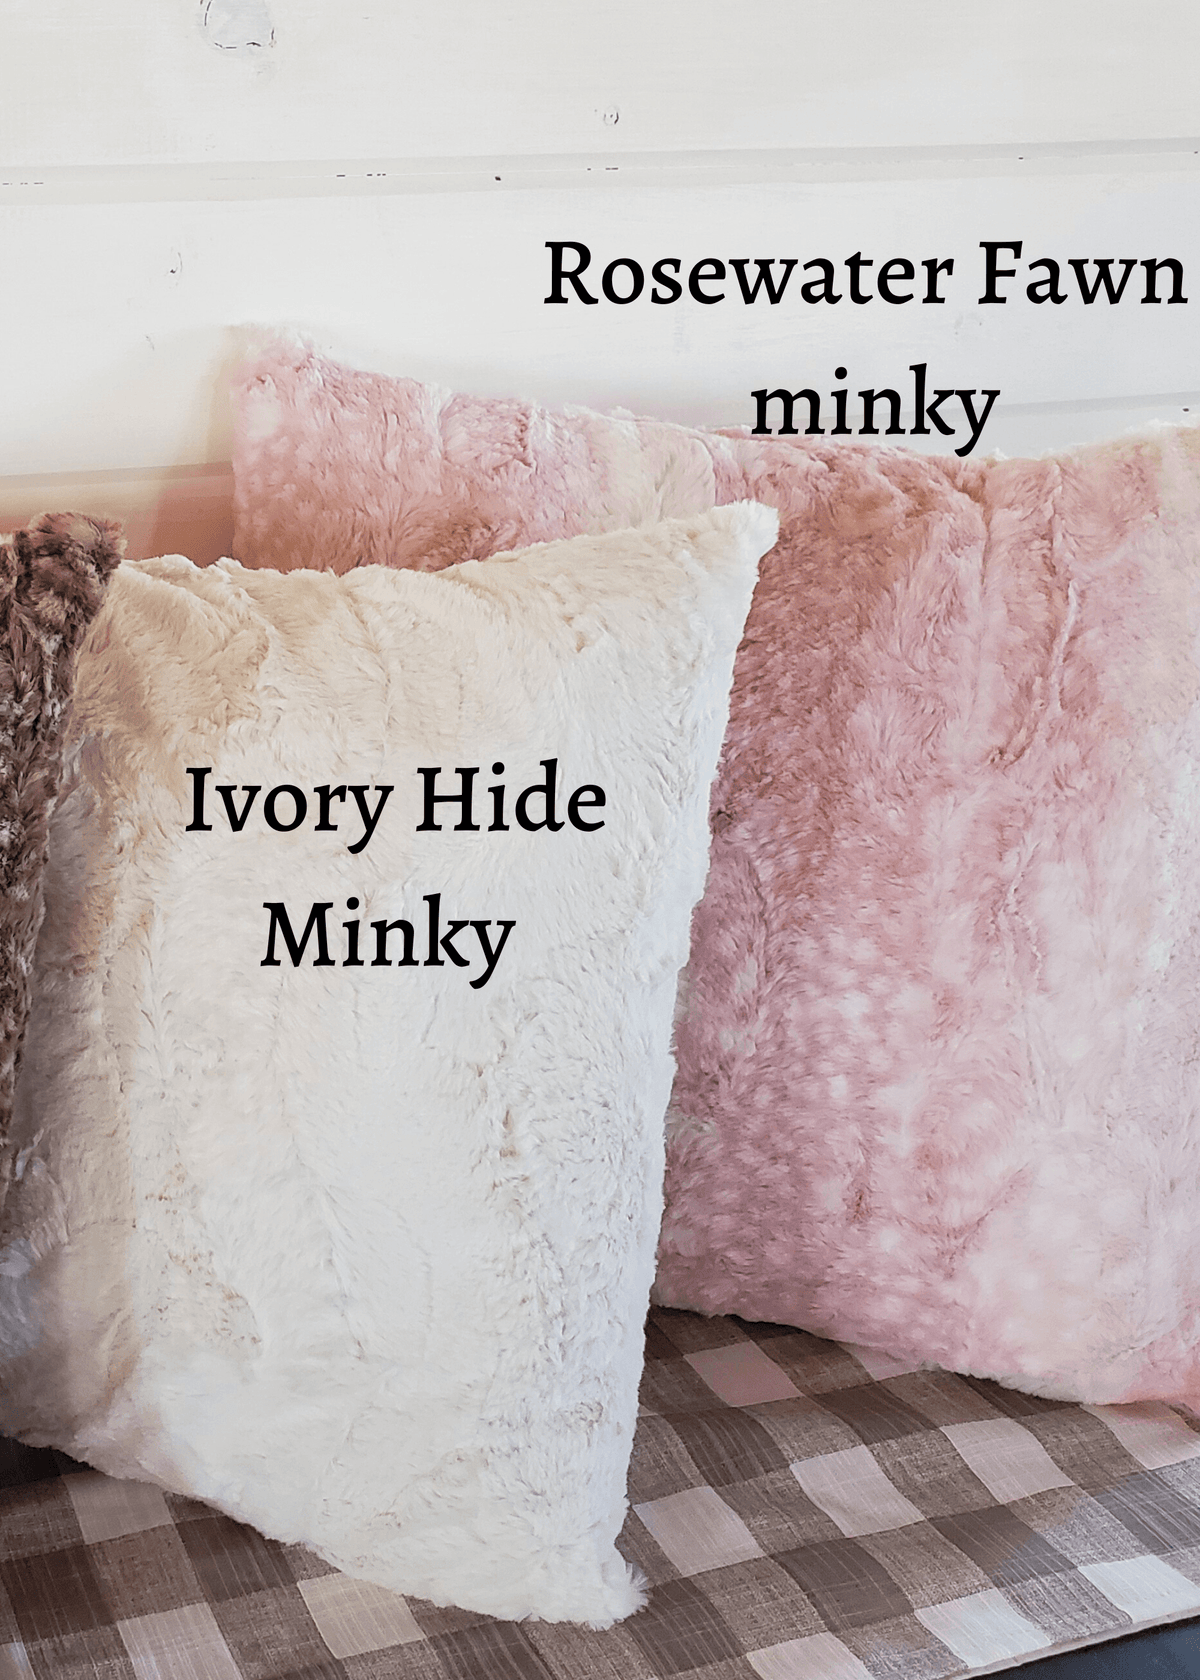 Decorative Pillow Cover - Minky - DBC Baby Bedding Co 